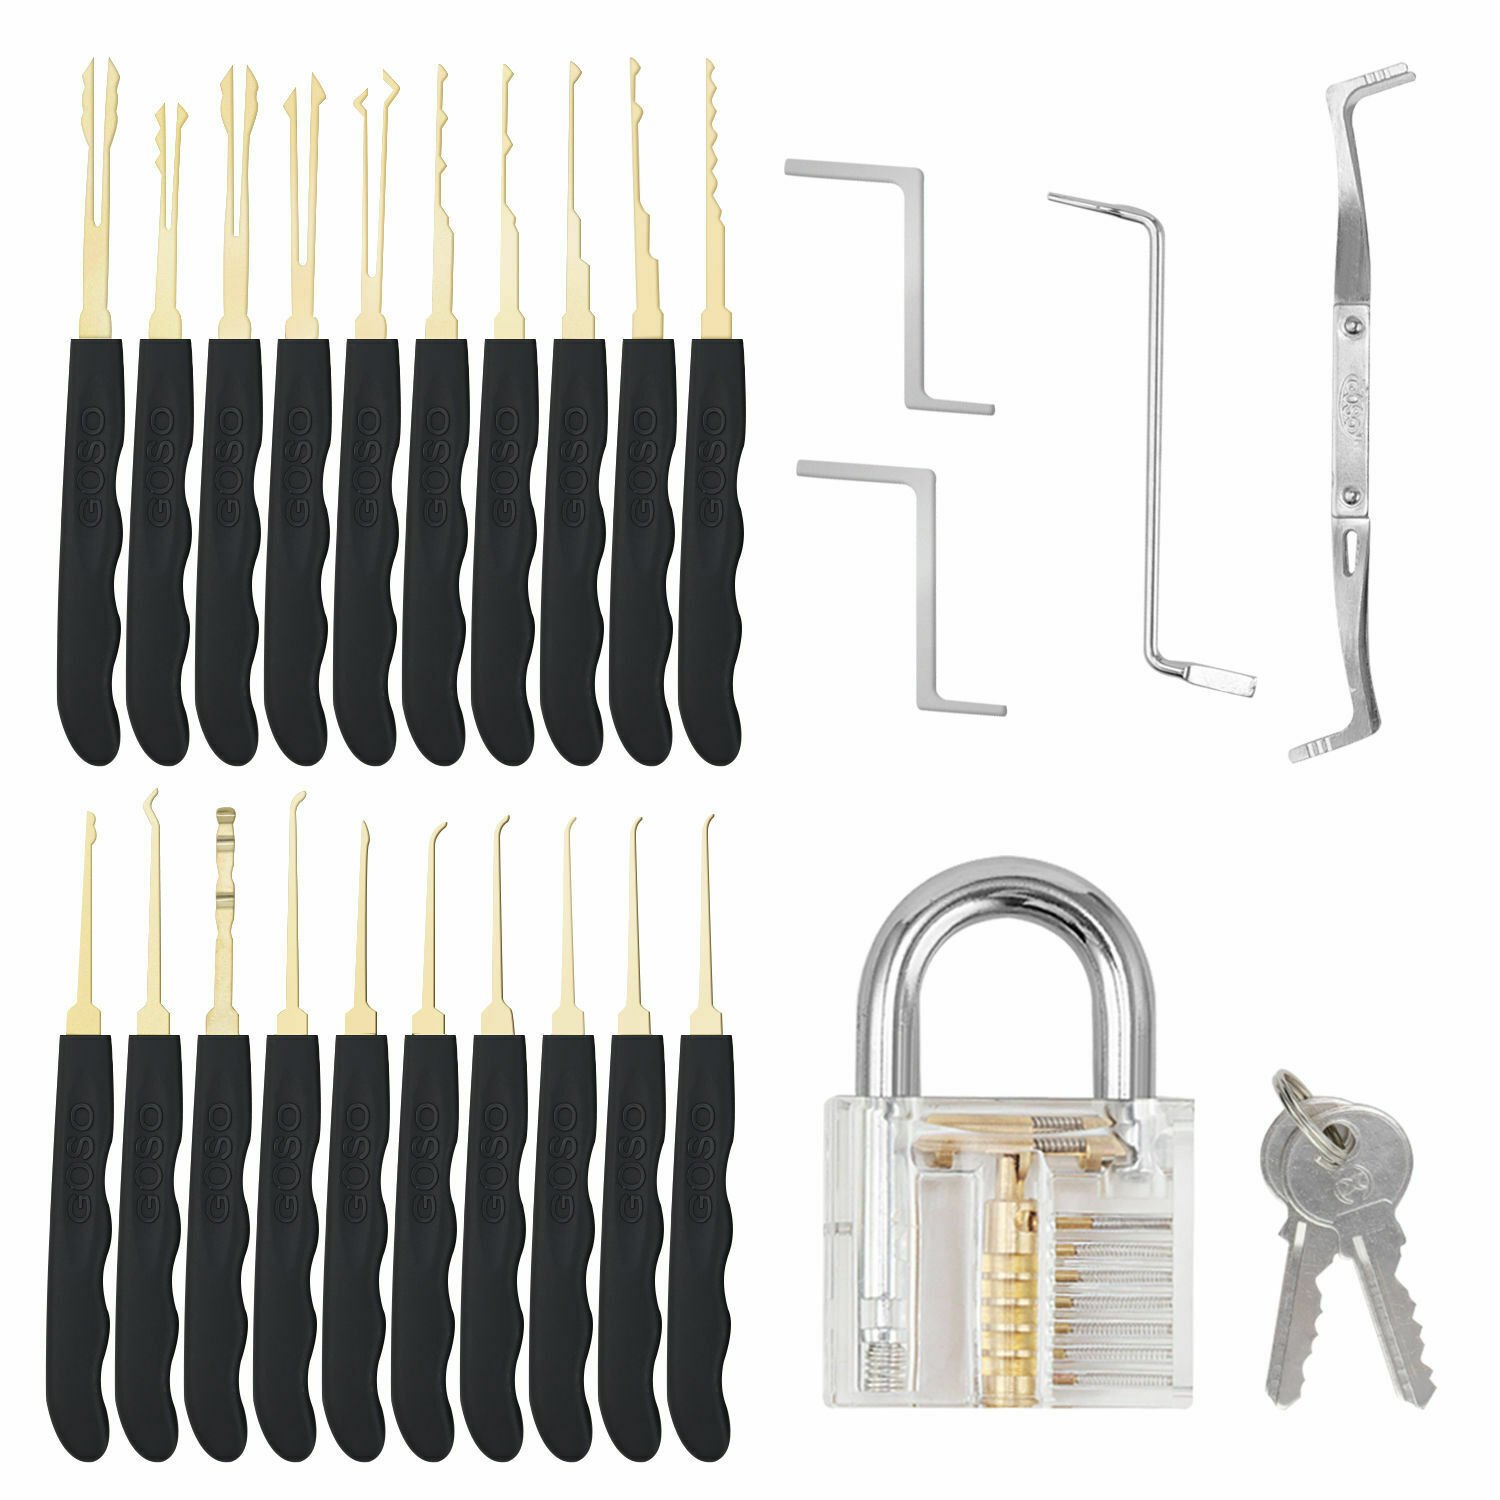 Terminal gijzelaar houten 31 Pieces Professional Lock Pick Set with 24 Pieces Lock Picking Tools, 2  Transparent Practice Locks, and 5 Pieces Portable Credit Card Lock Pick Set